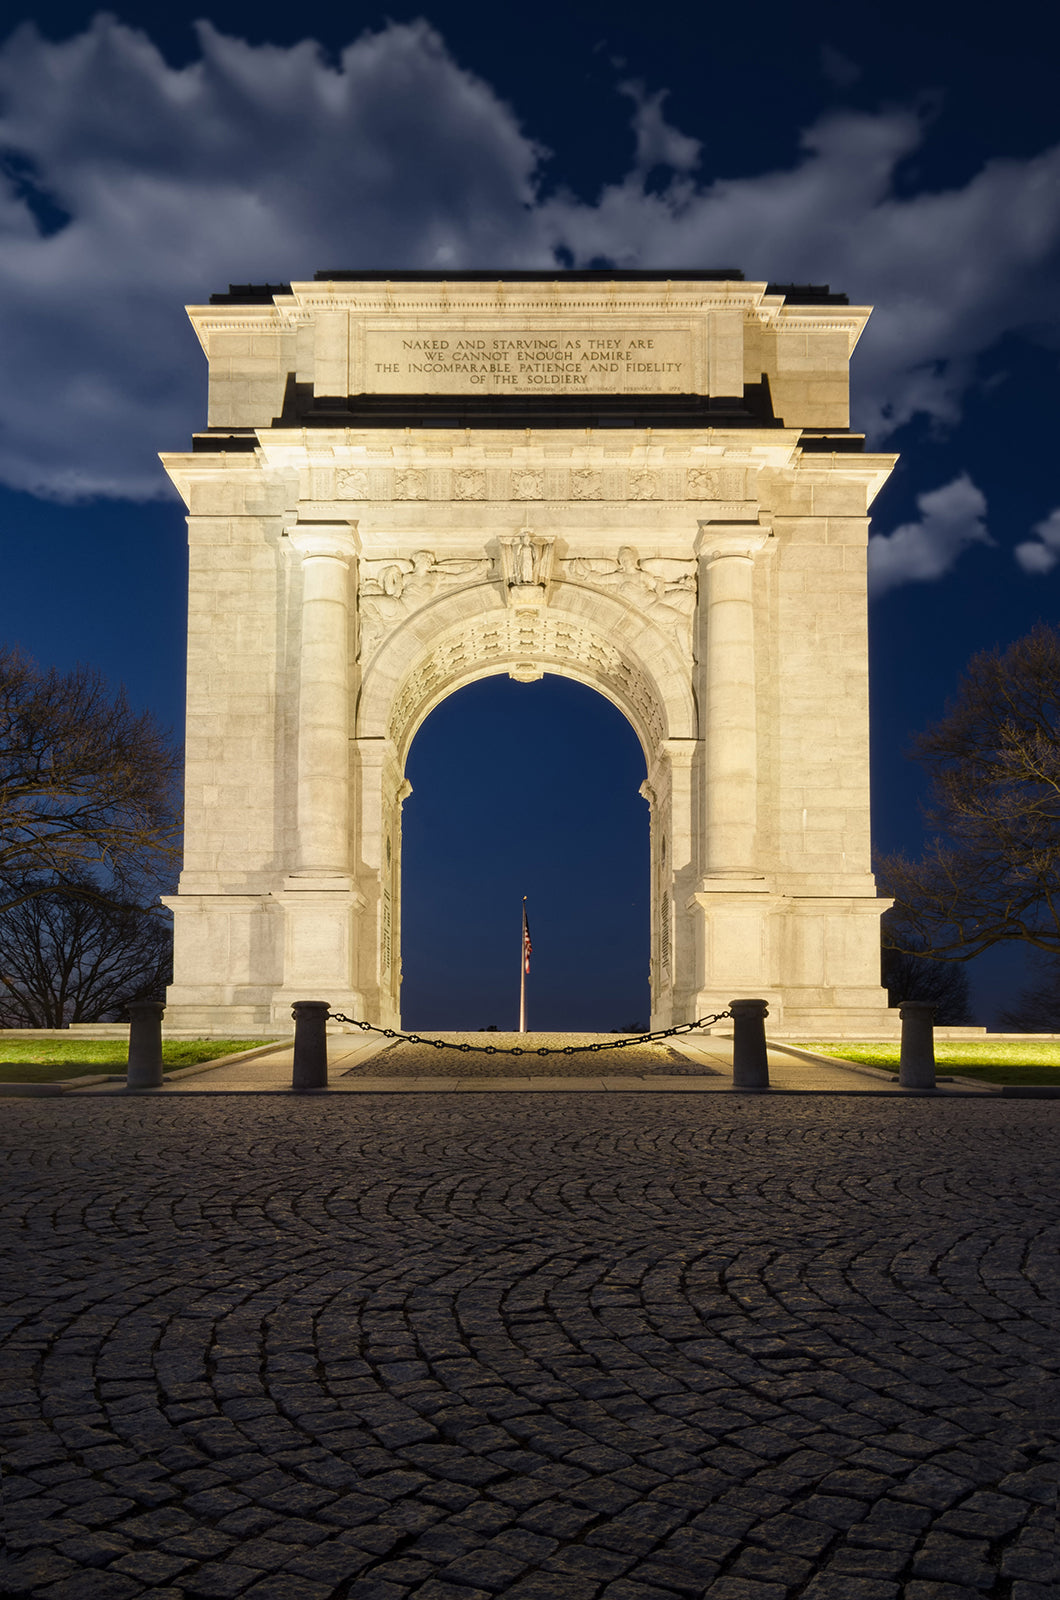 Valley Forge Arch Urban Night Landscape Photo DIY Wall Decor Instant Download Print - Printable  - PIPAFINEART